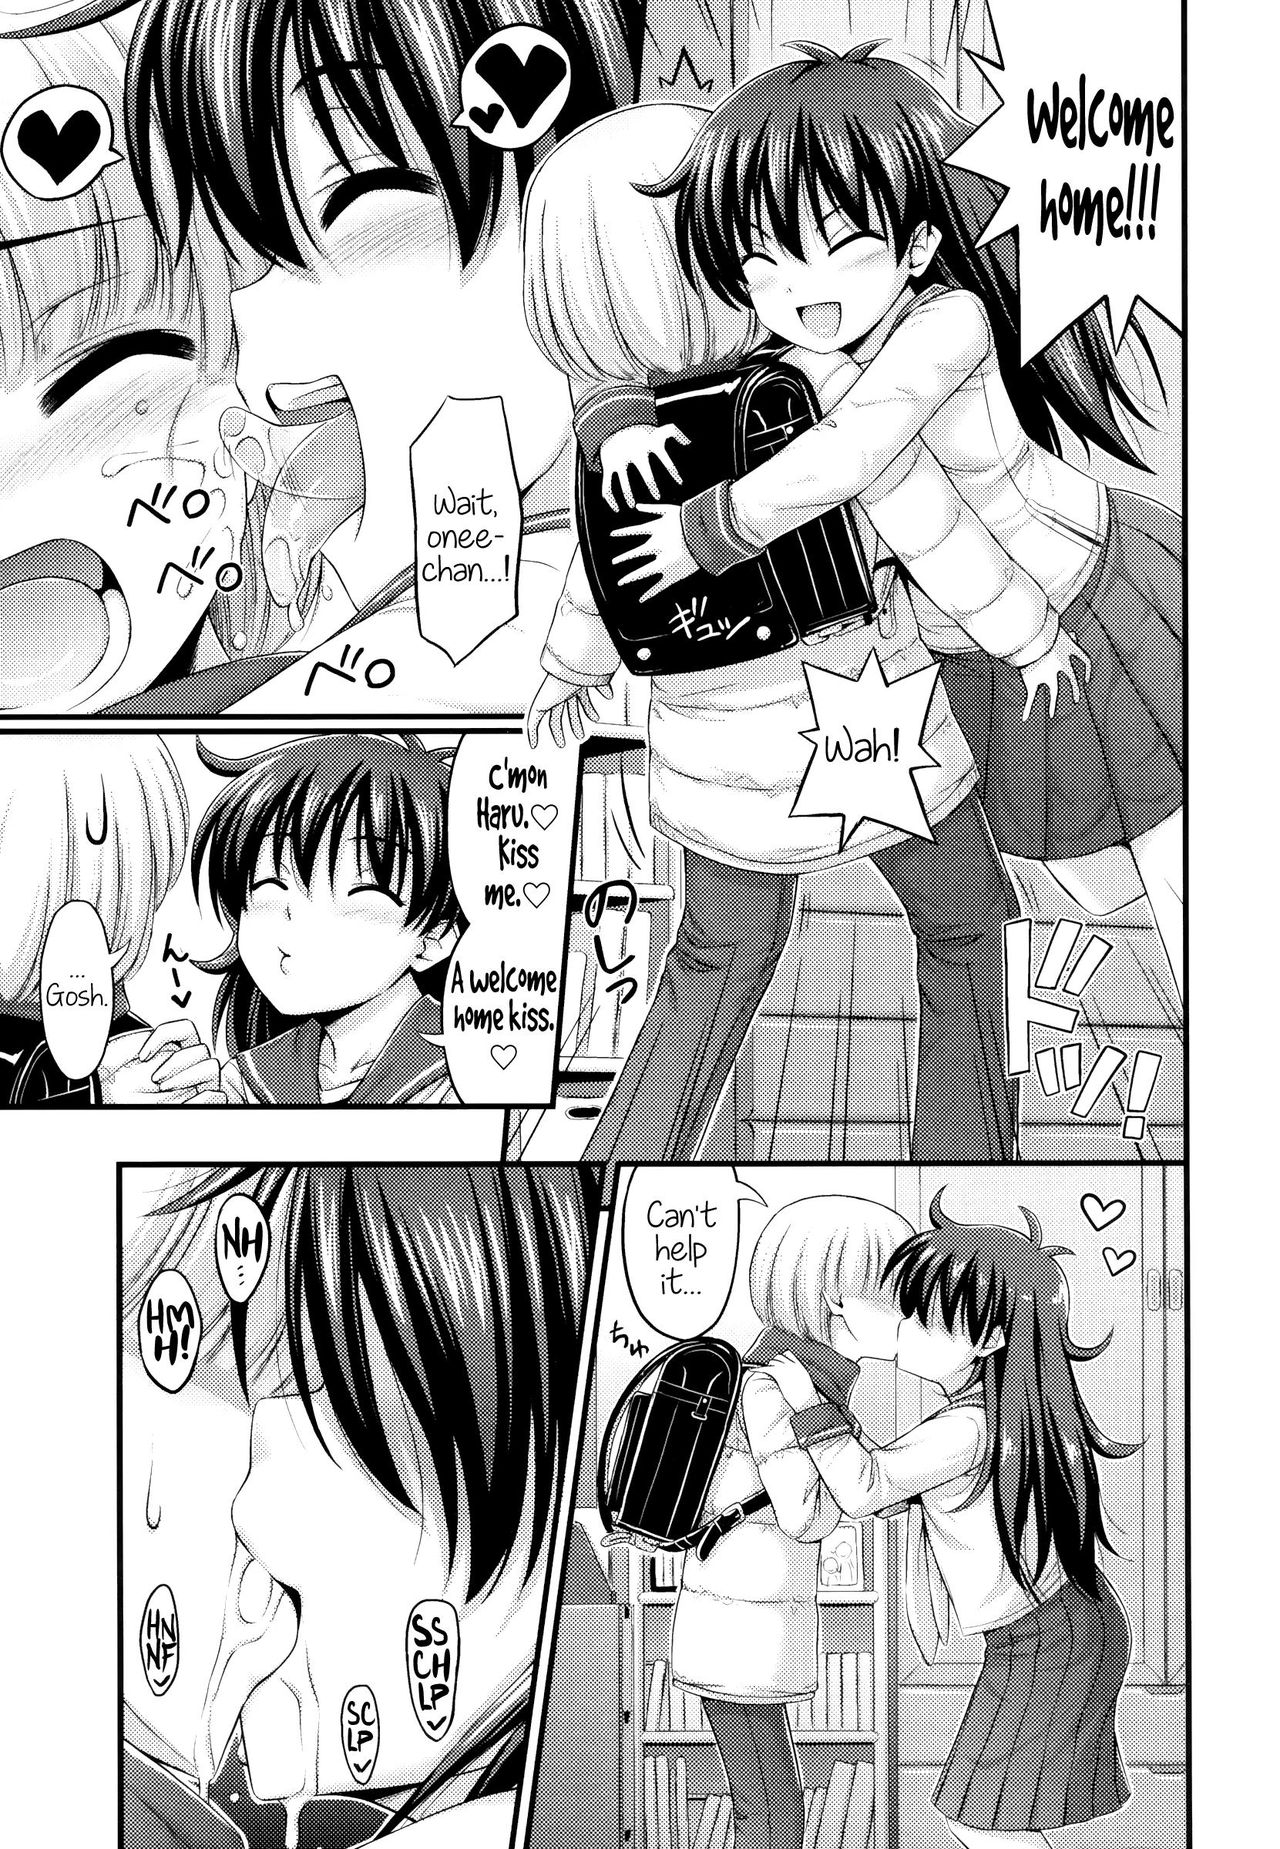 [Noise] Otouto mo Kawaii | My brother is cute too (JS☆JC) [English] [Rin] [Decensored] page 3 full